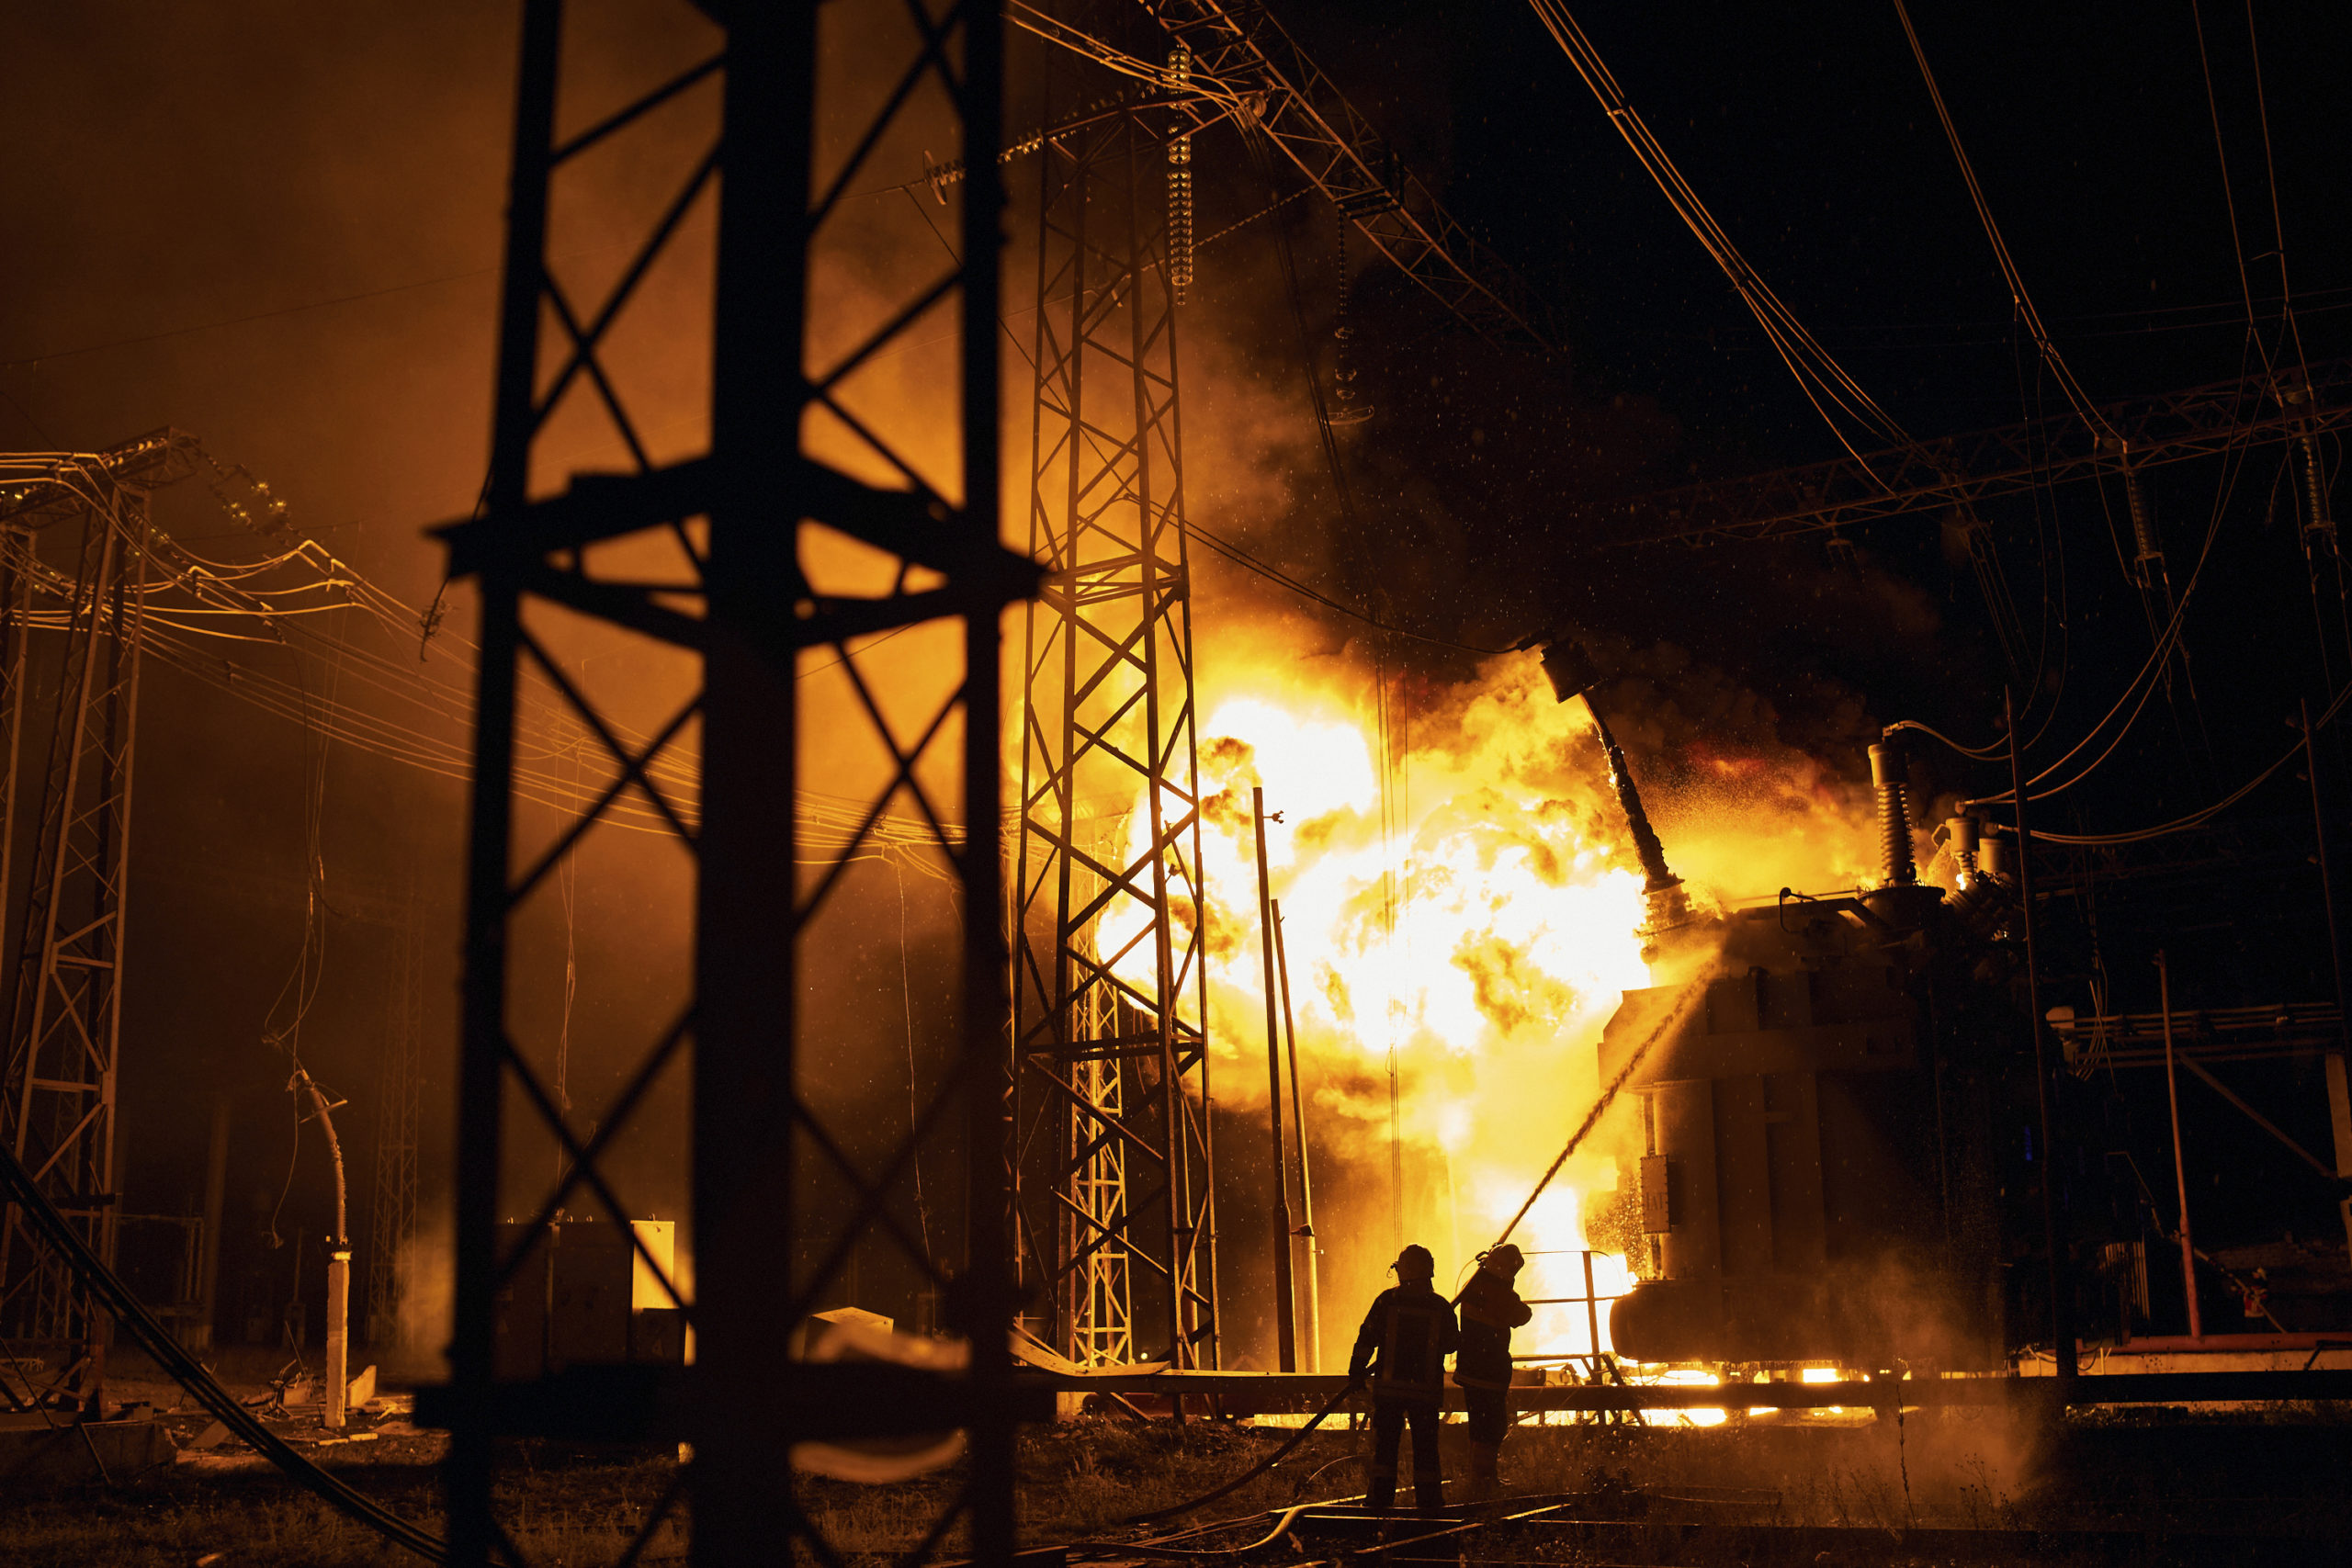 On Sunday, Ukrainian State Emergency Service firefighters put out a fire at an electric power station in Kharkiv, Ukraine, started by a Russian rocket attack.